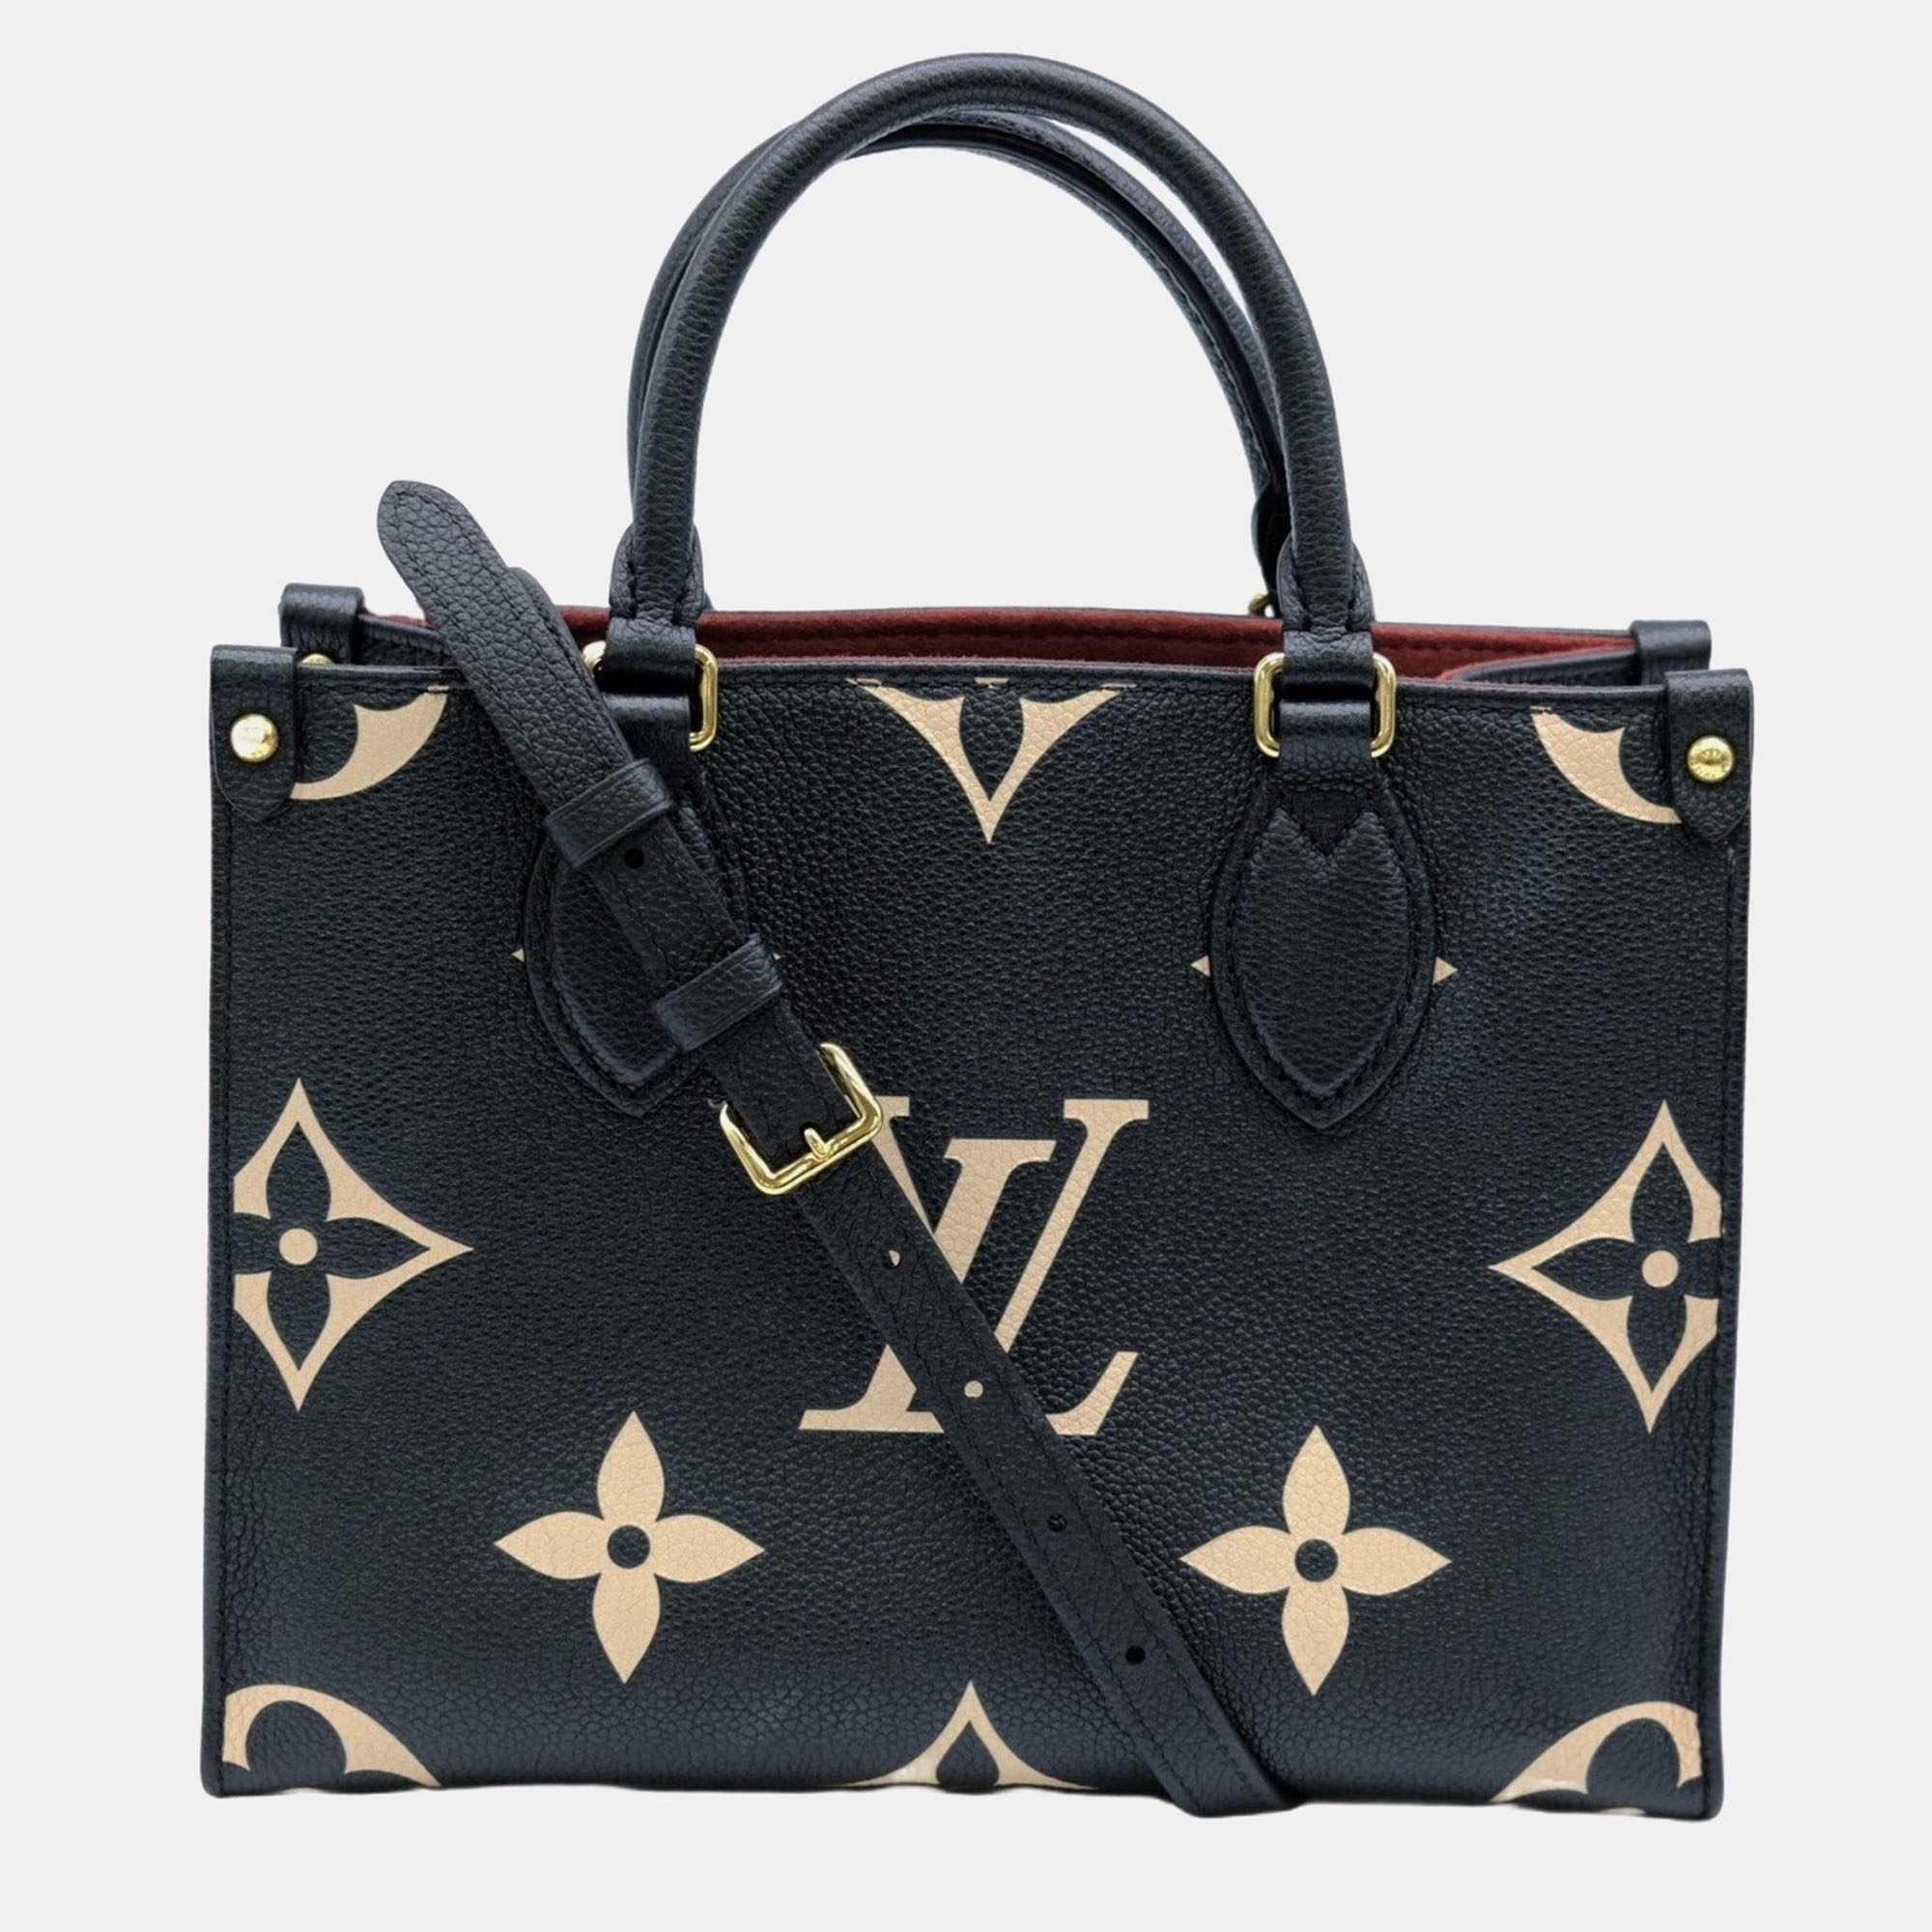 Louis vuitton beige/black leather small onthego tote bag